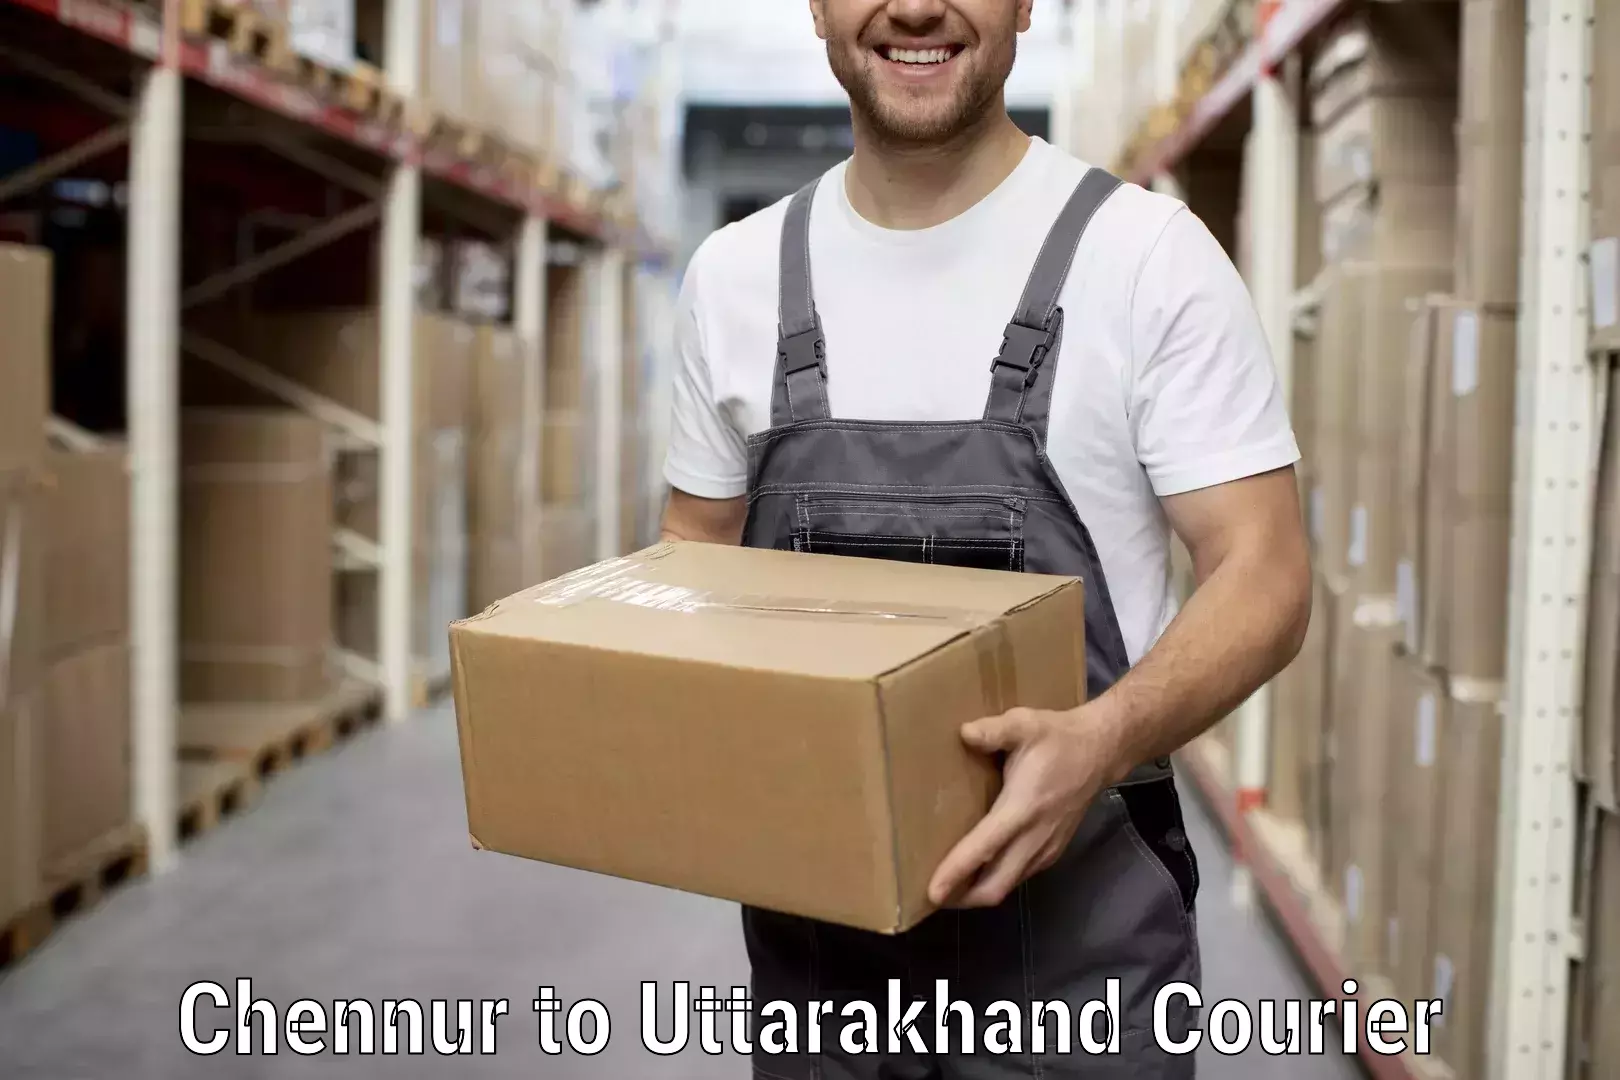 Quality relocation services in Chennur to Pithoragarh